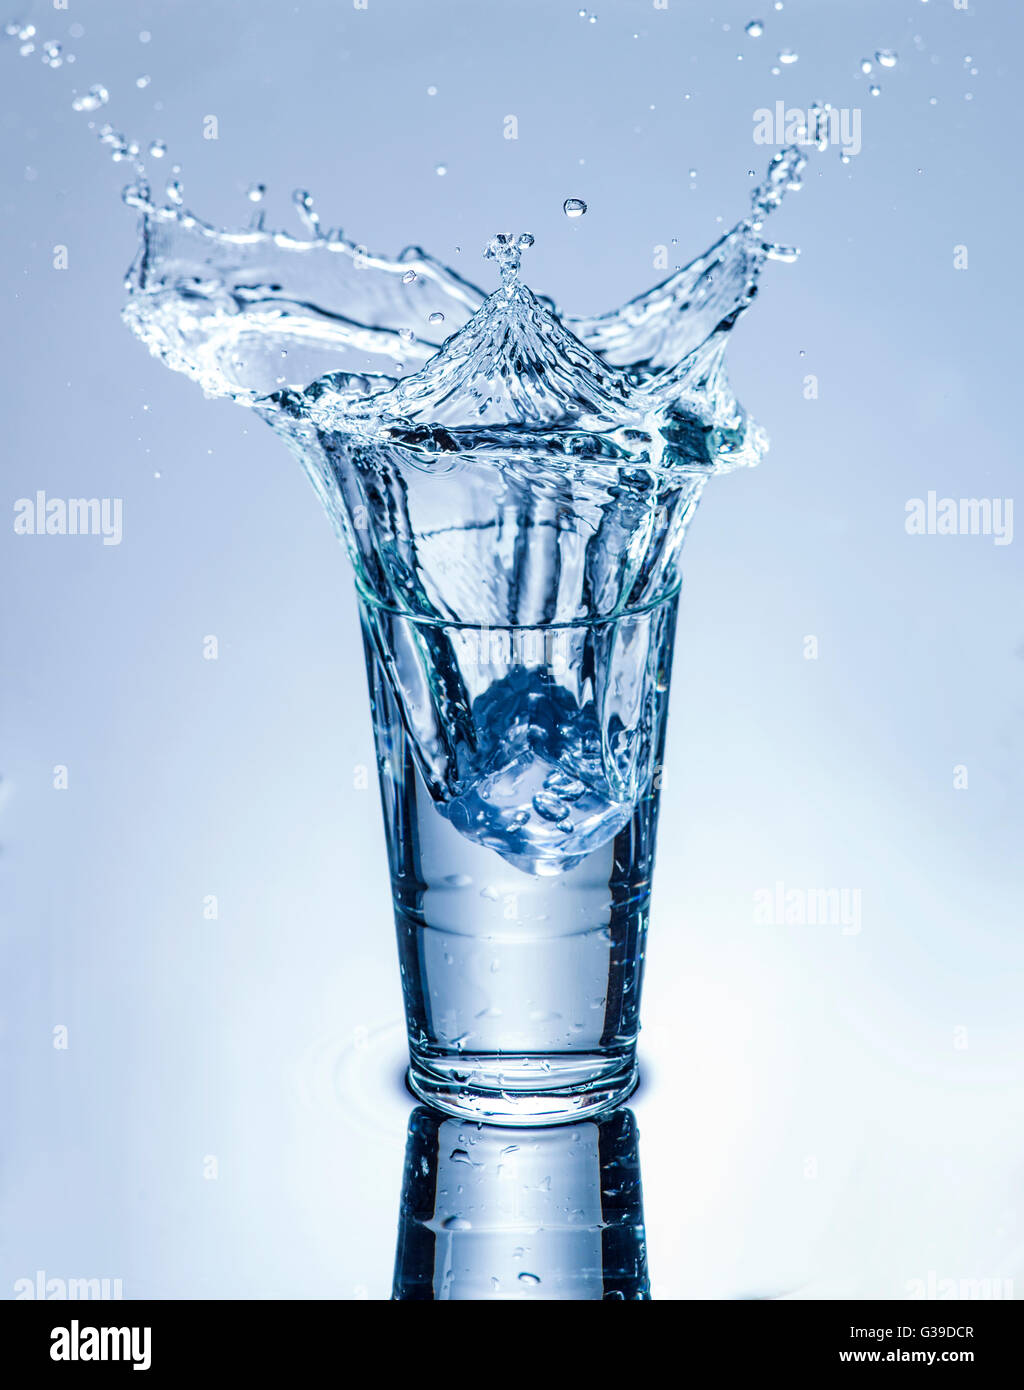 Glass of water. Glass of cold water with splash and dew drops